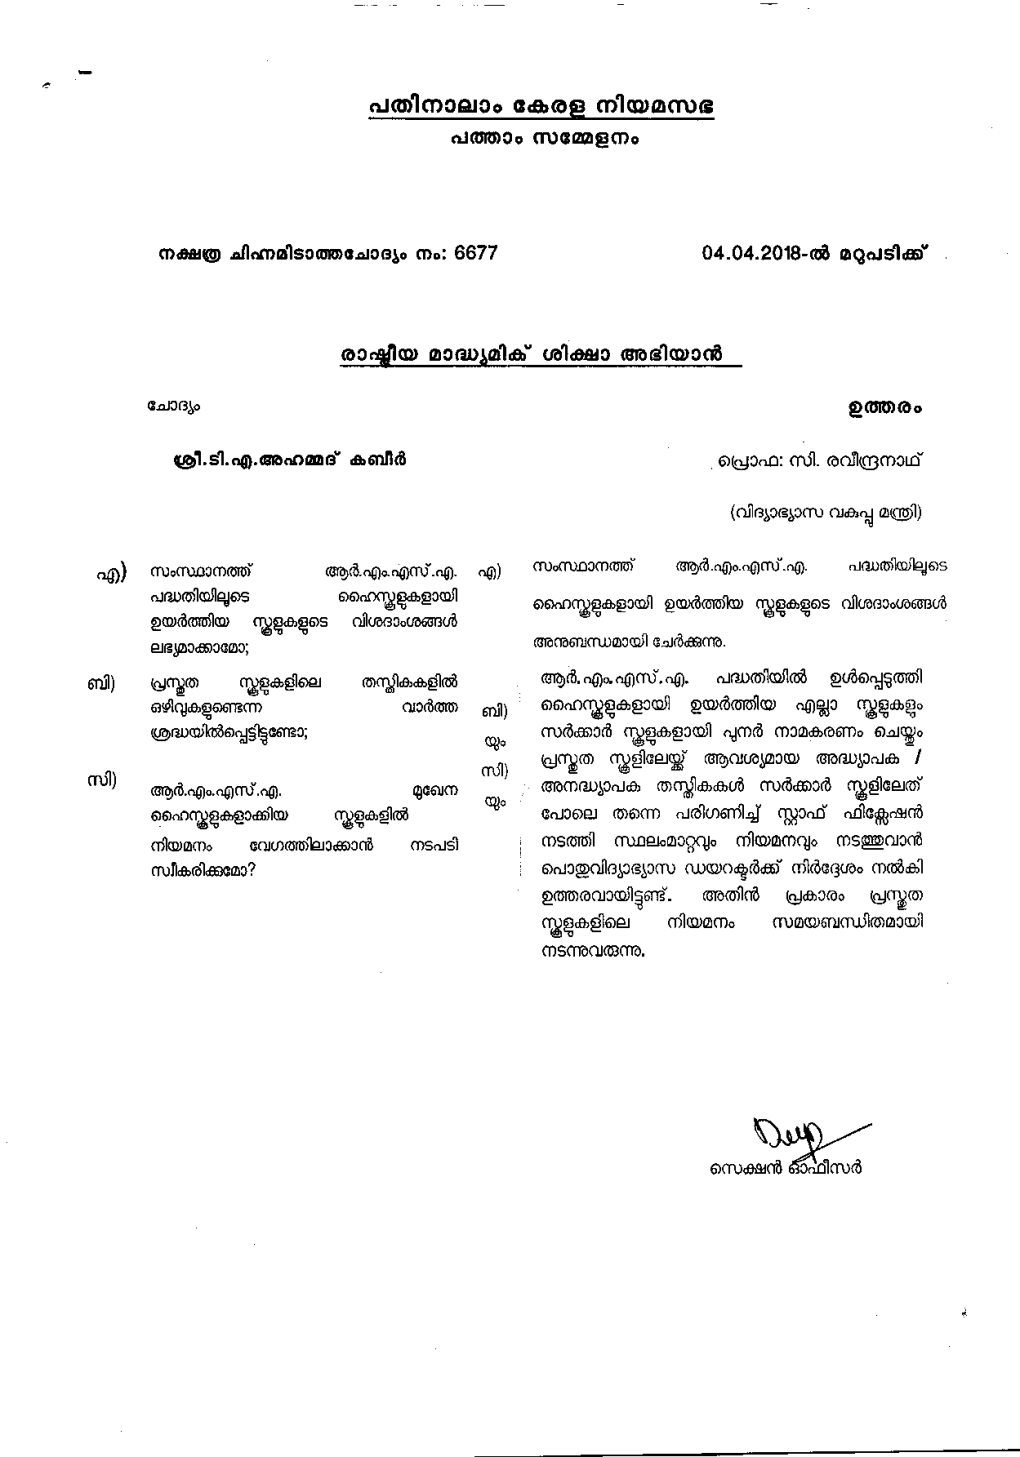 "**\*F List of Schools Upgraded Unde